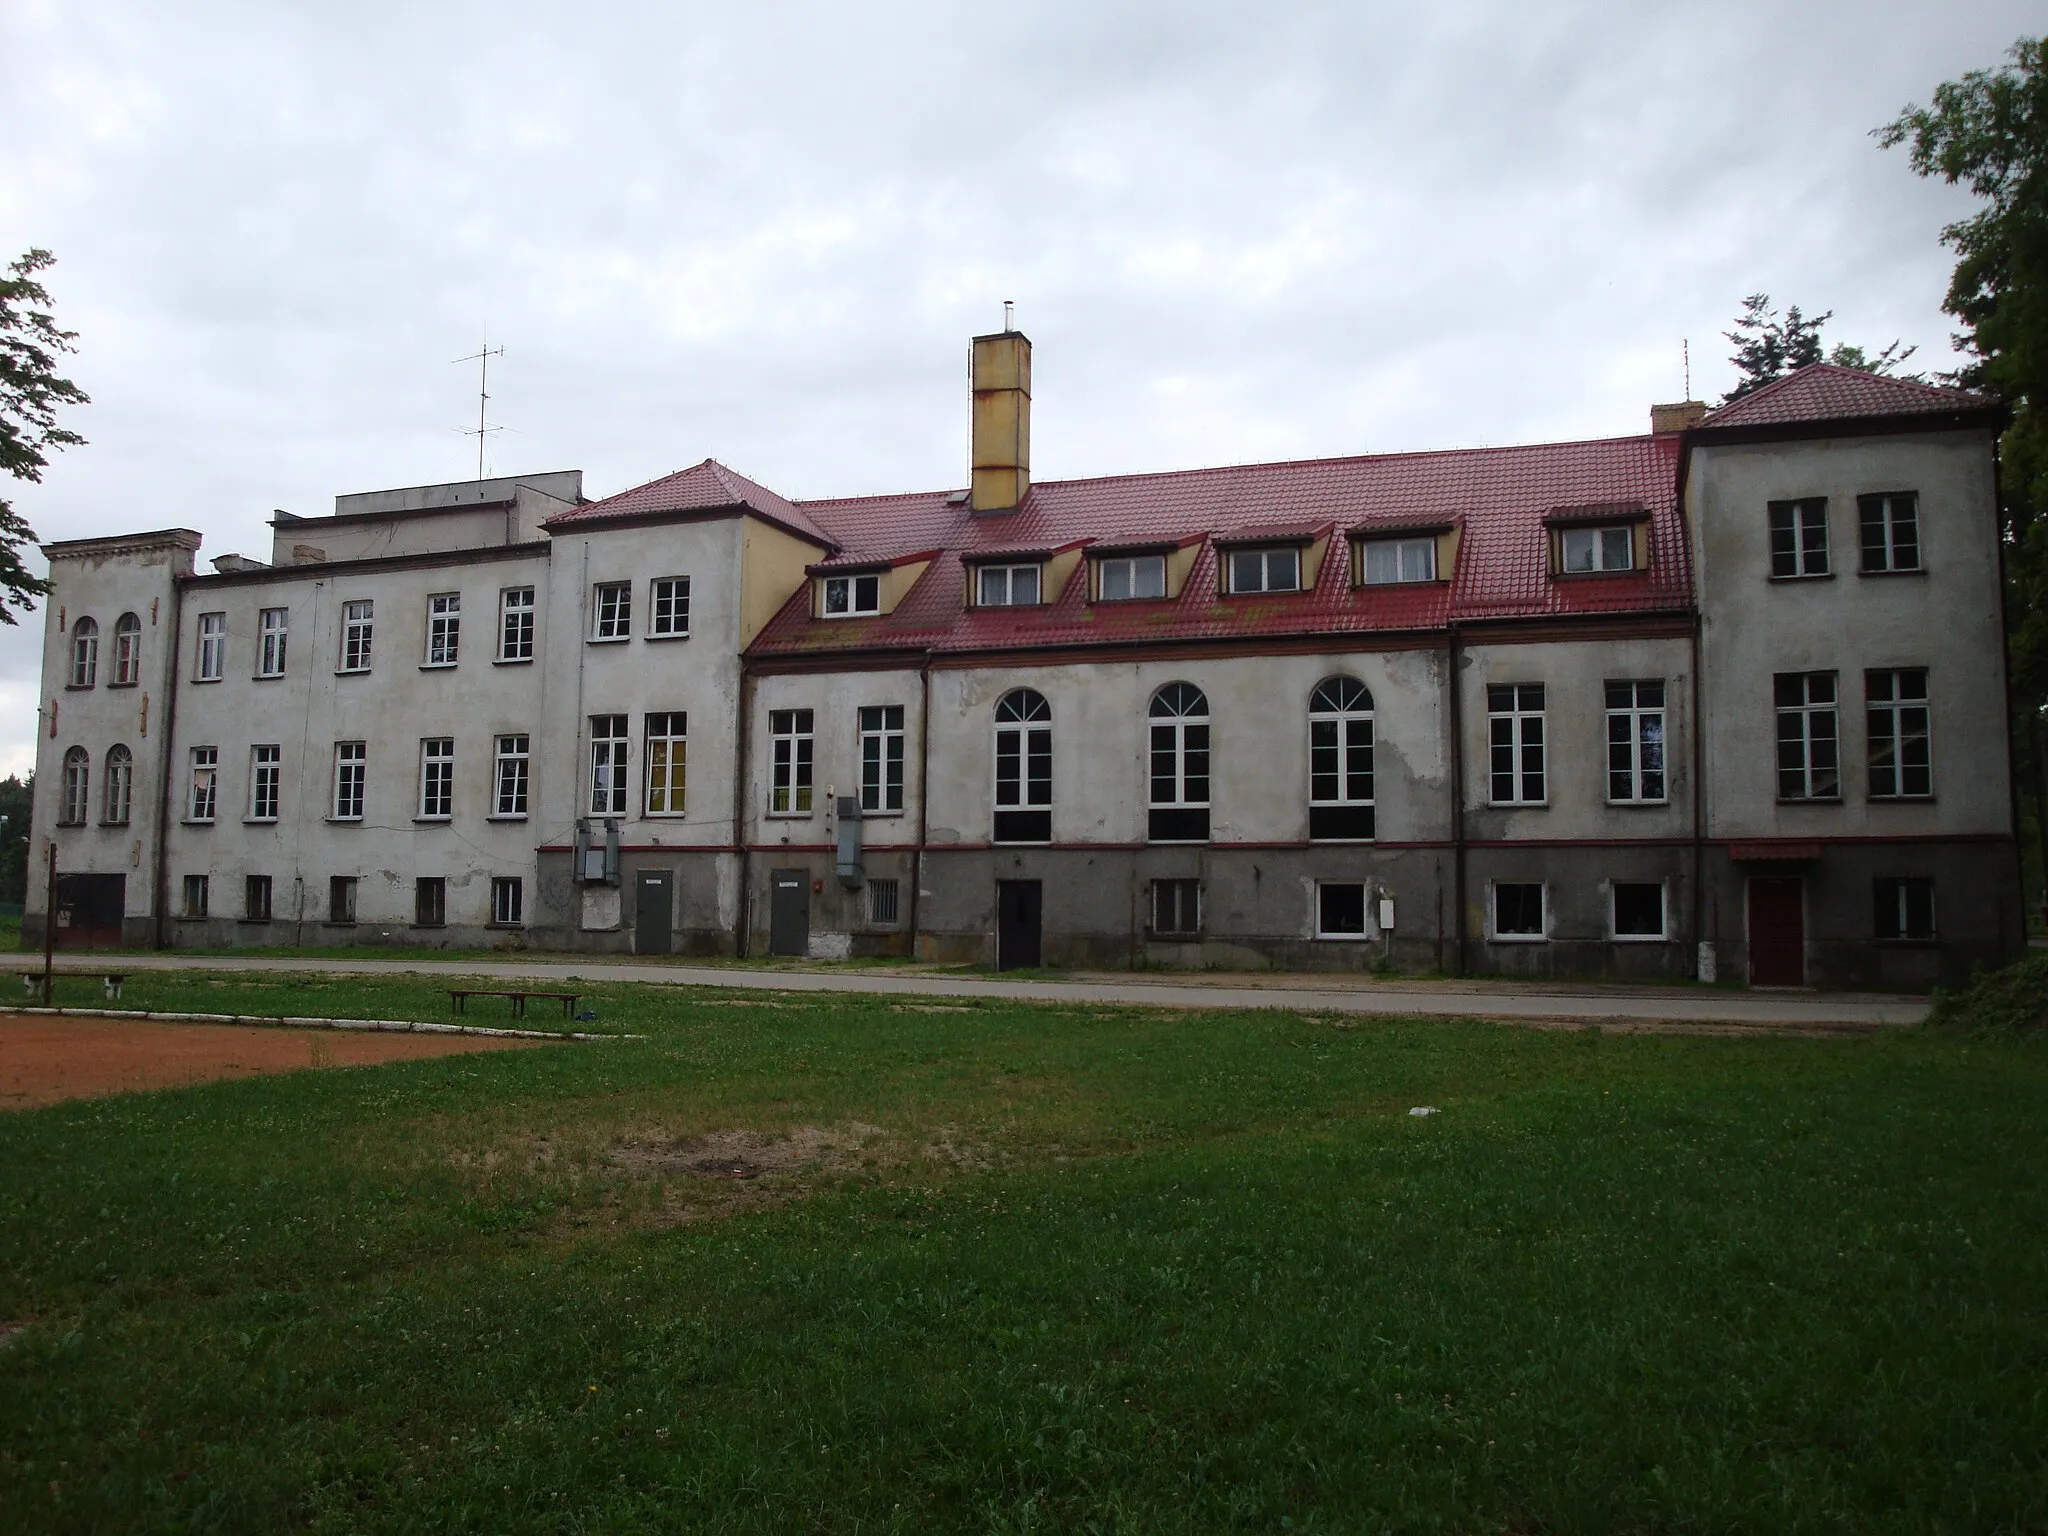 Photo showing: Wicko, village in pomeranian voivodeship, Poland. Building of school, formely palace